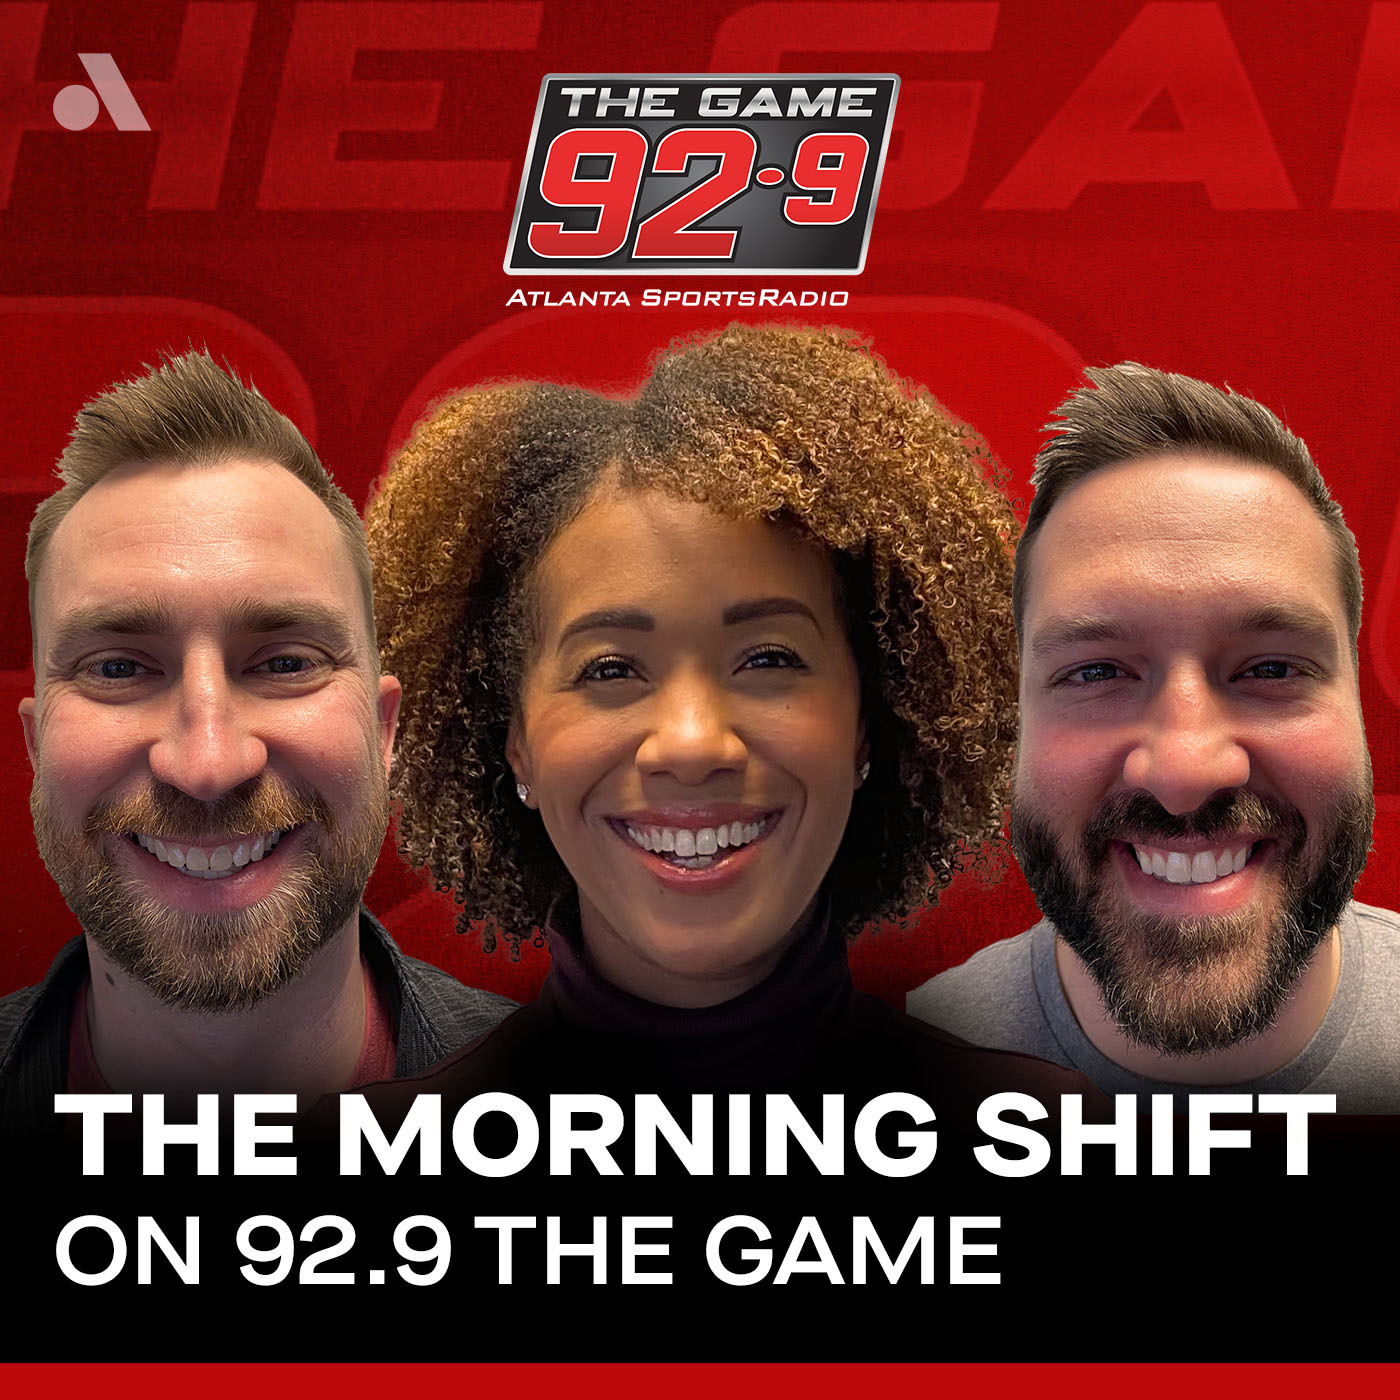 The Morning Shift on 92.9 The Game